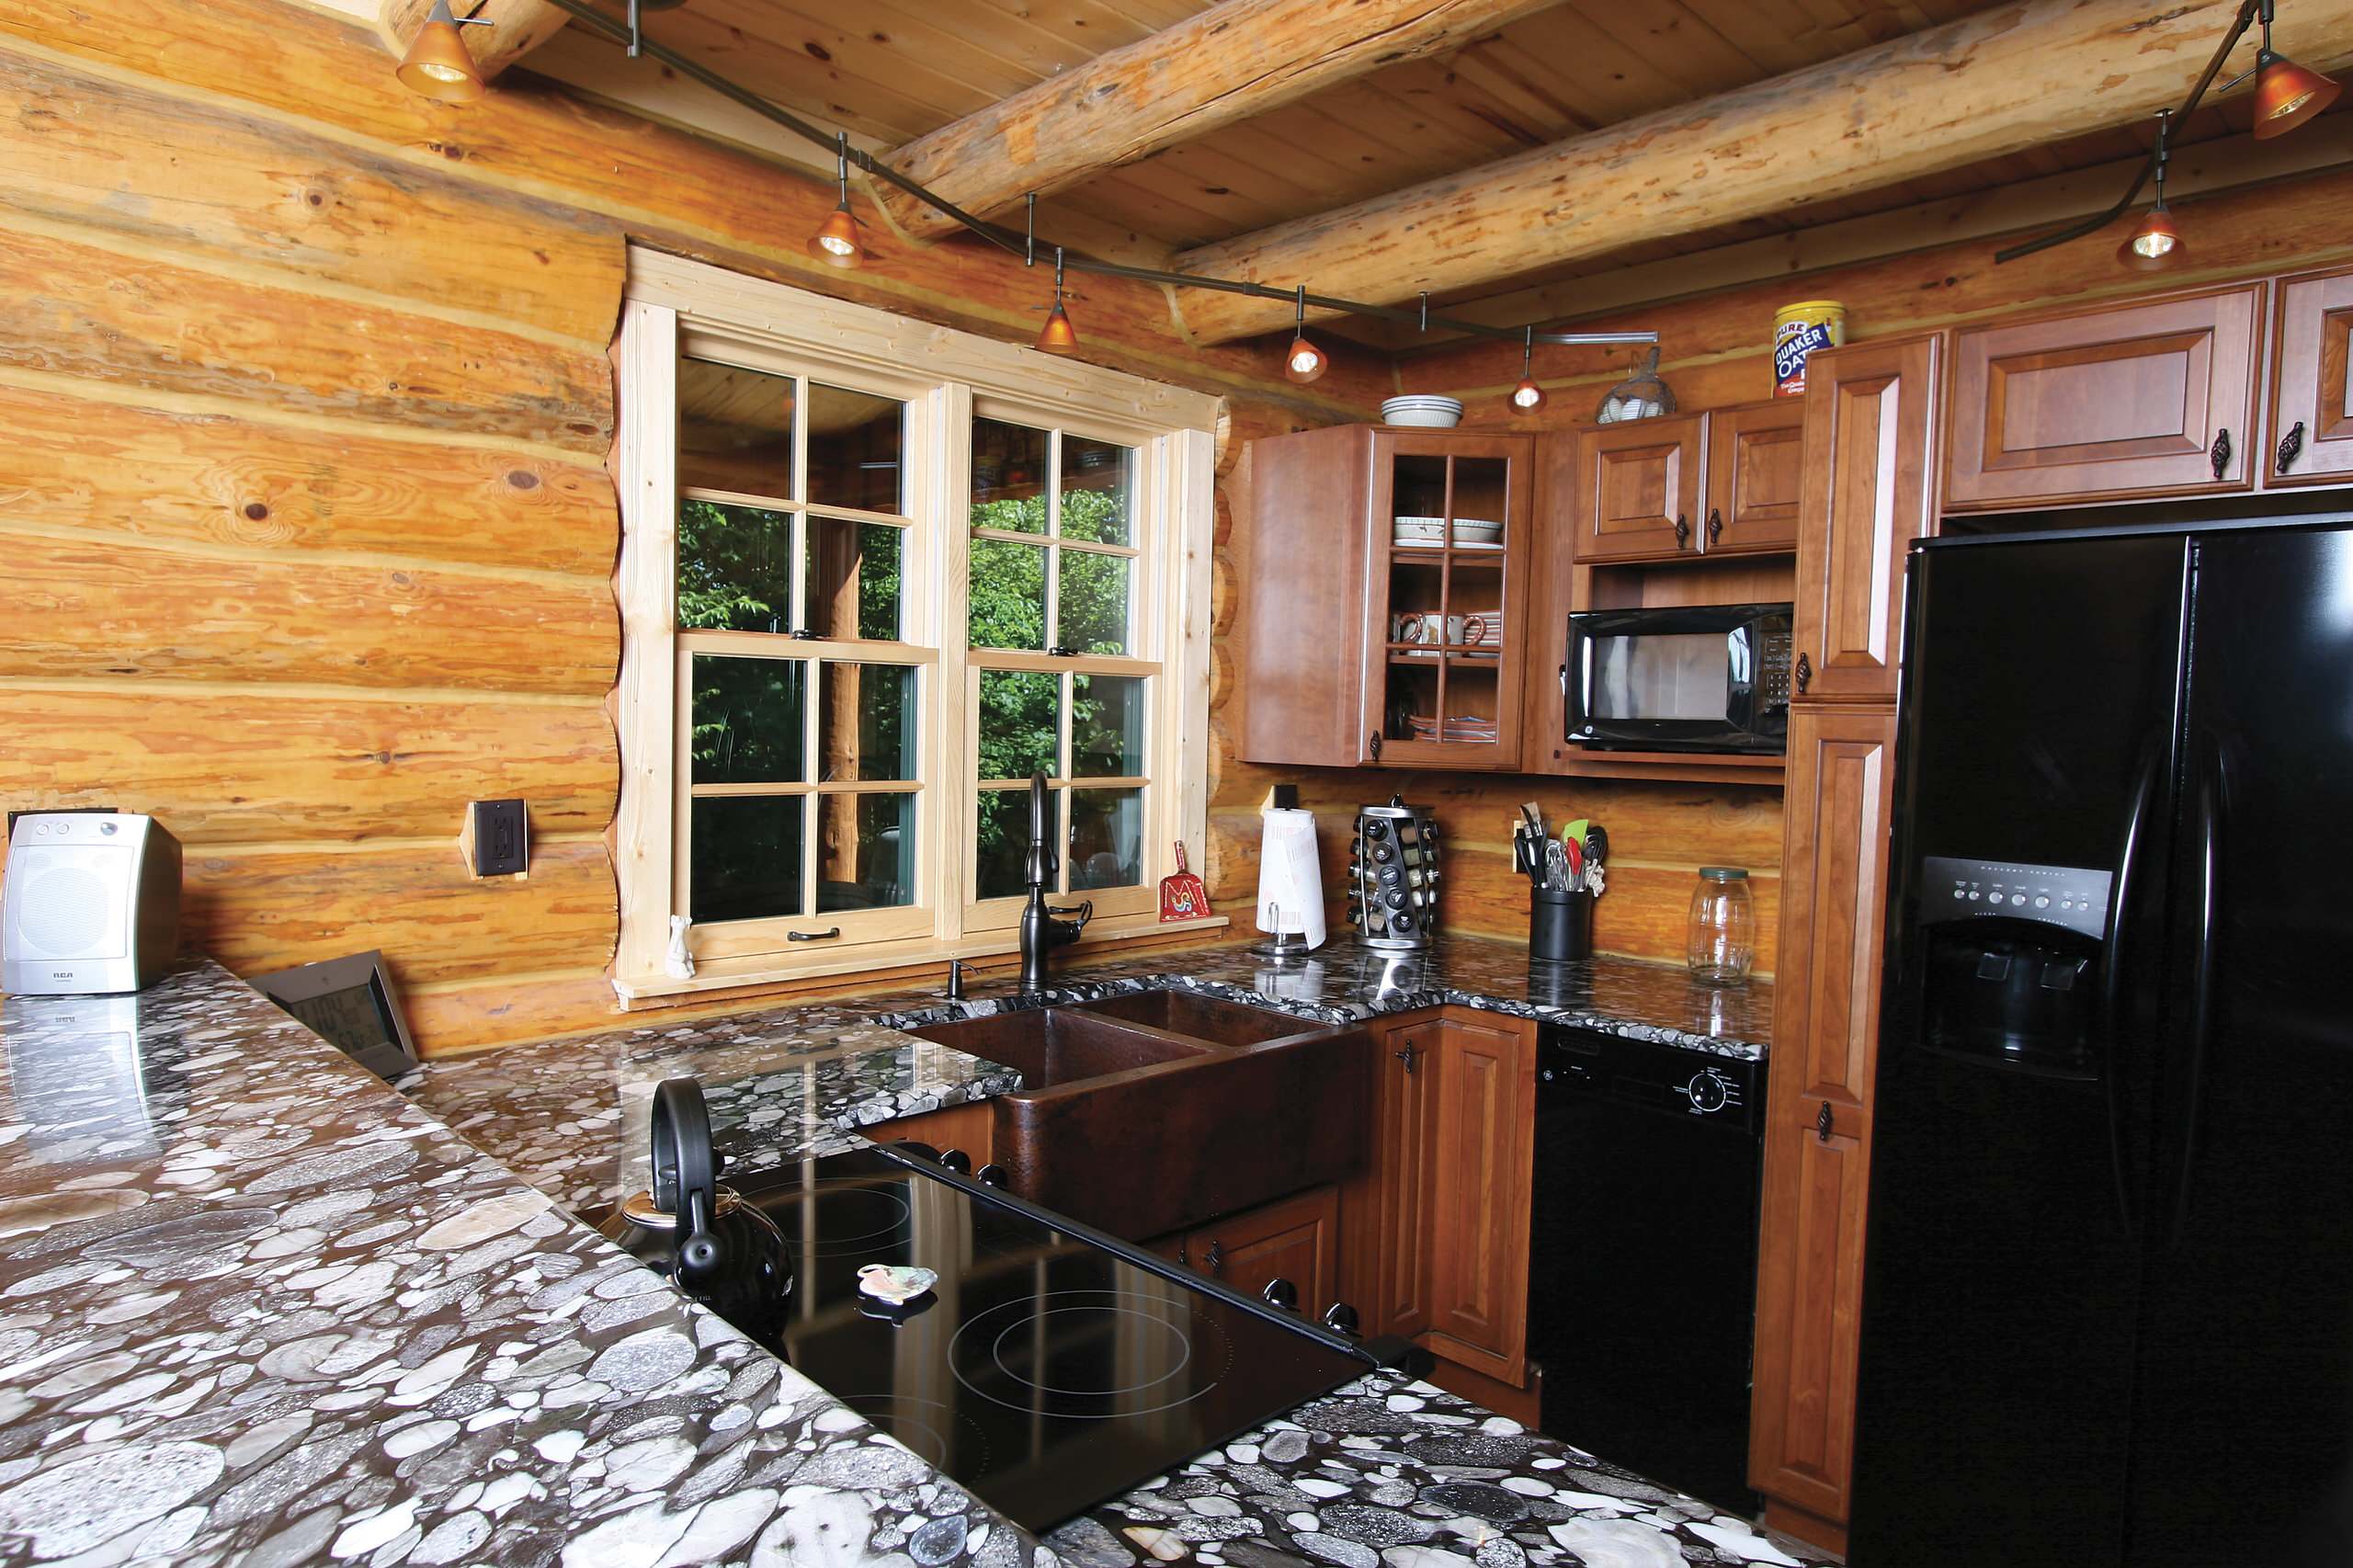 crackle paint for log cabin kitchen wall